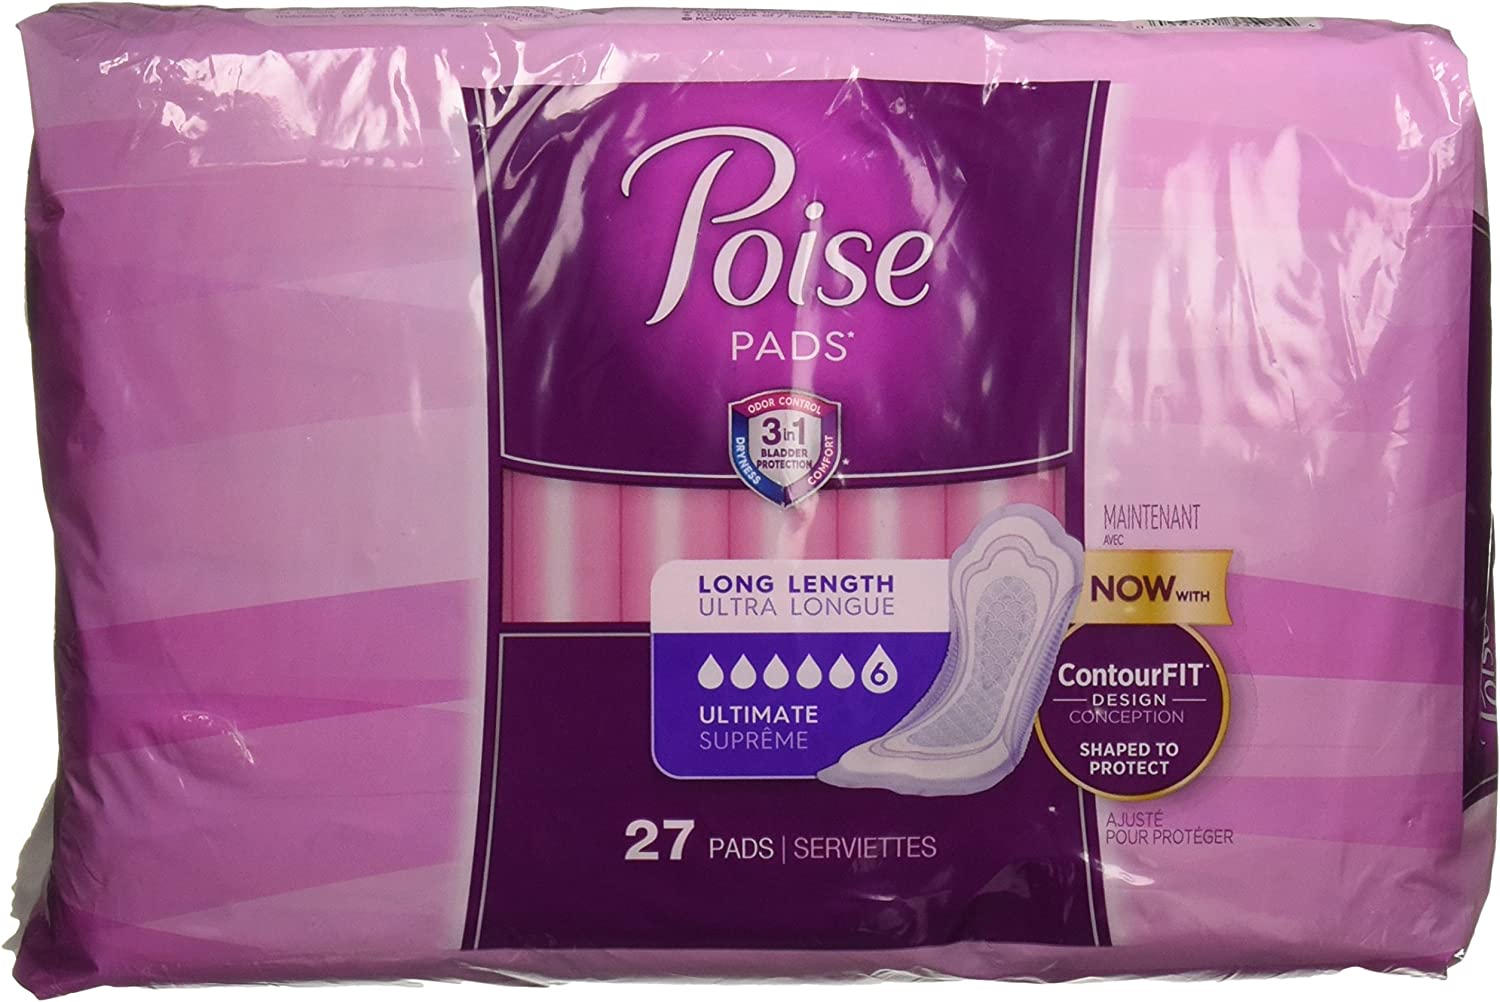  Poise Incontinence Pads & Postpartum Incontinence Pads, 7 Drop  Ultra Absorbency, Long Length, 78 Count (2 Packs of 39), Packaging May Vary  : Health & Household